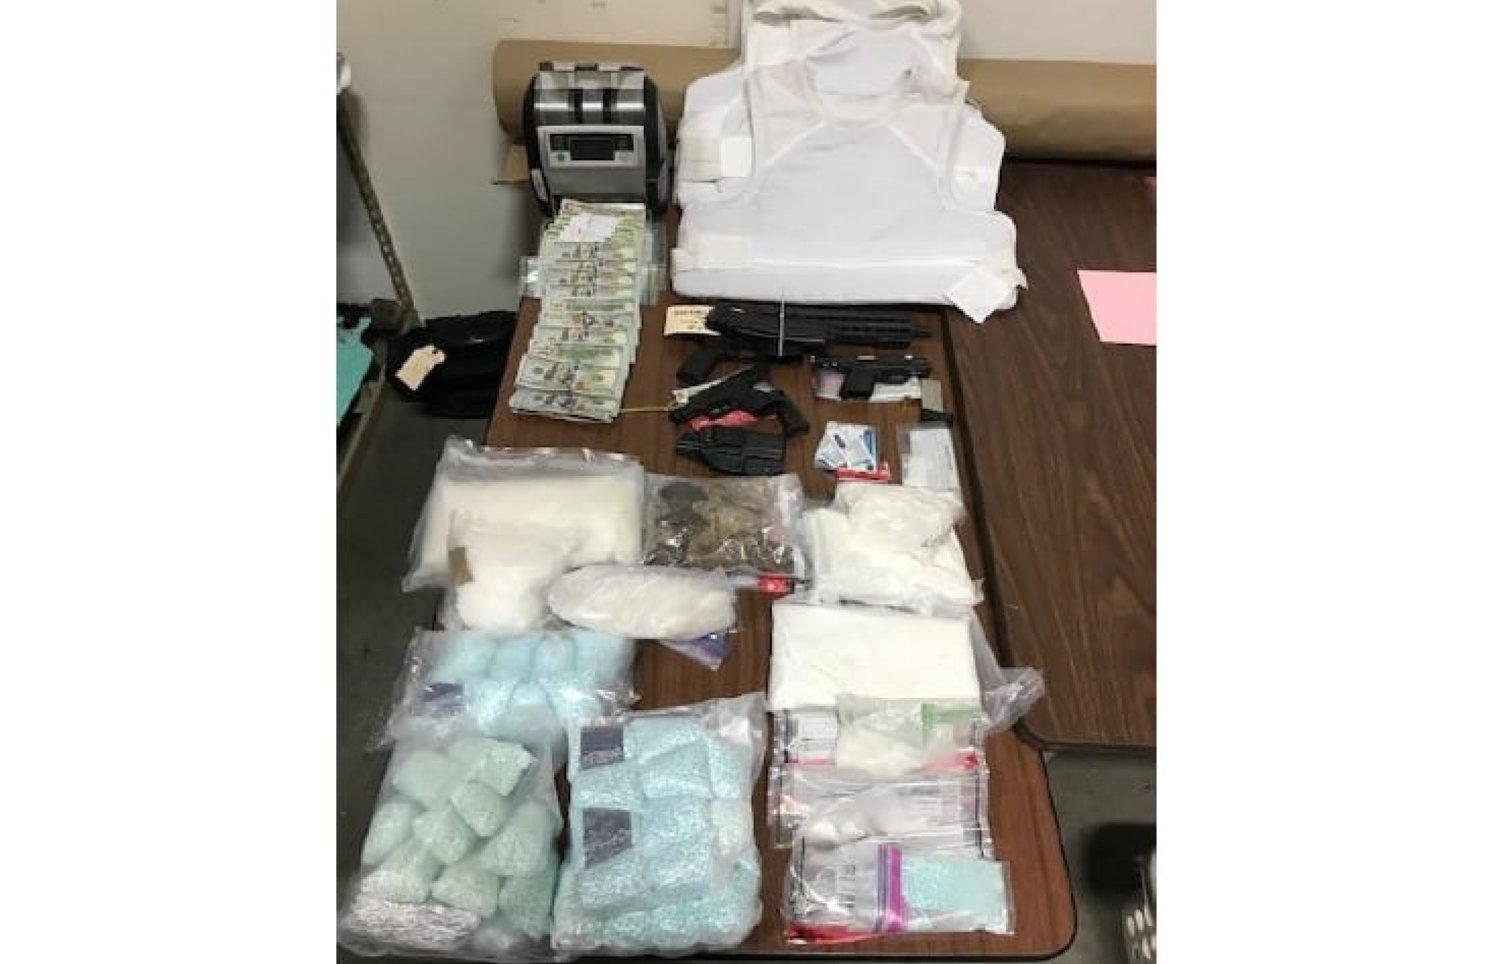 The search resulted in the seizure of 5.7 pounds of methamphetamine, 4.7 pounds of cocaine, 9.8 pounds of fentanyl, 2.3 pounds of heroin, three fully loaded firearms — one of which was stolen — three soft body armor vets and $90,000. The task force estimated the street value of the drugs at $1.2 million.